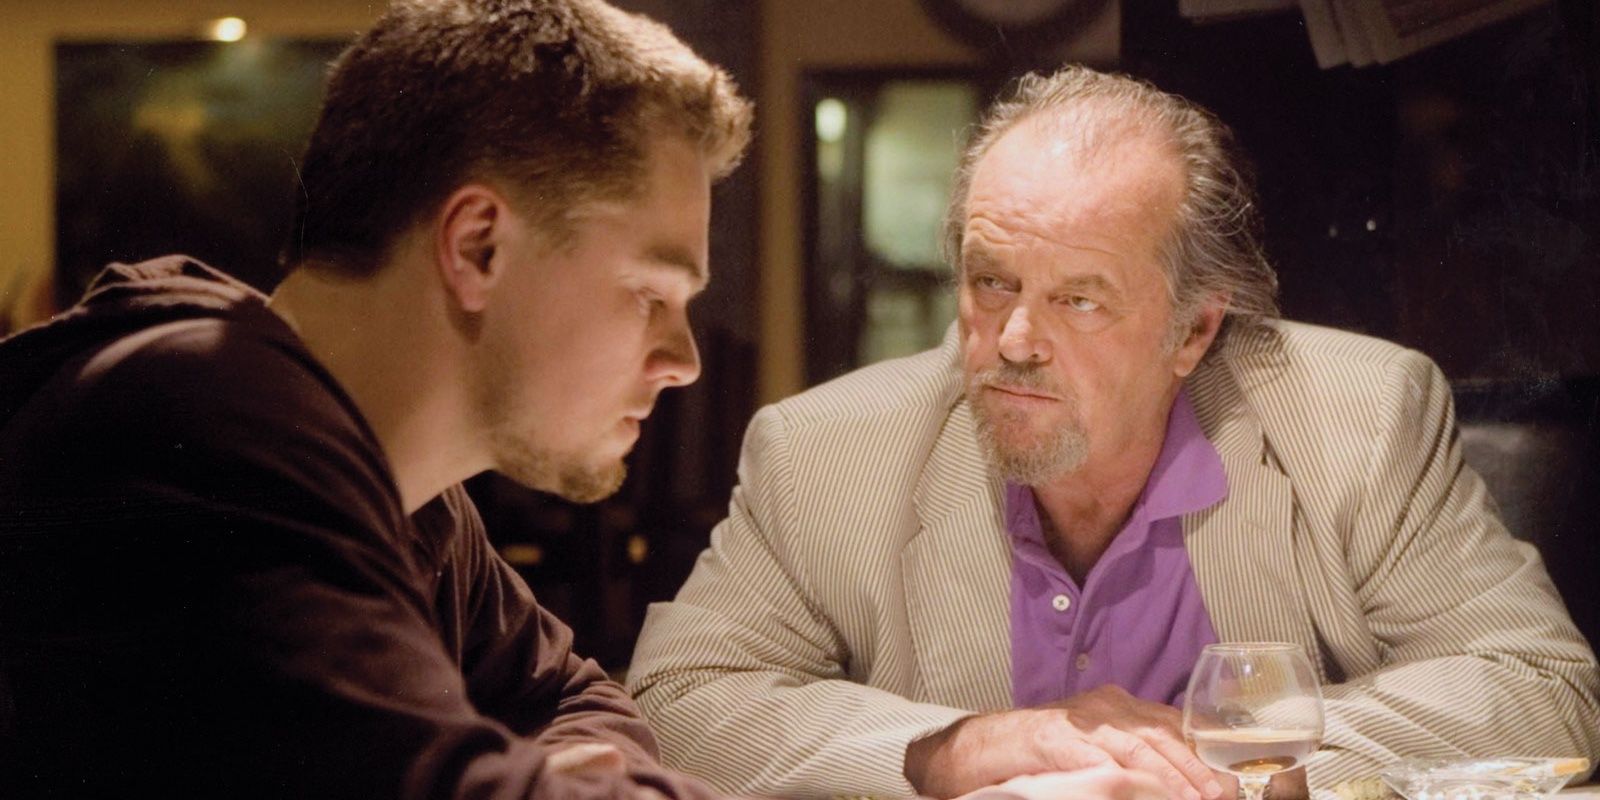 Costigan and Frank in conversation in a bar in The Departed